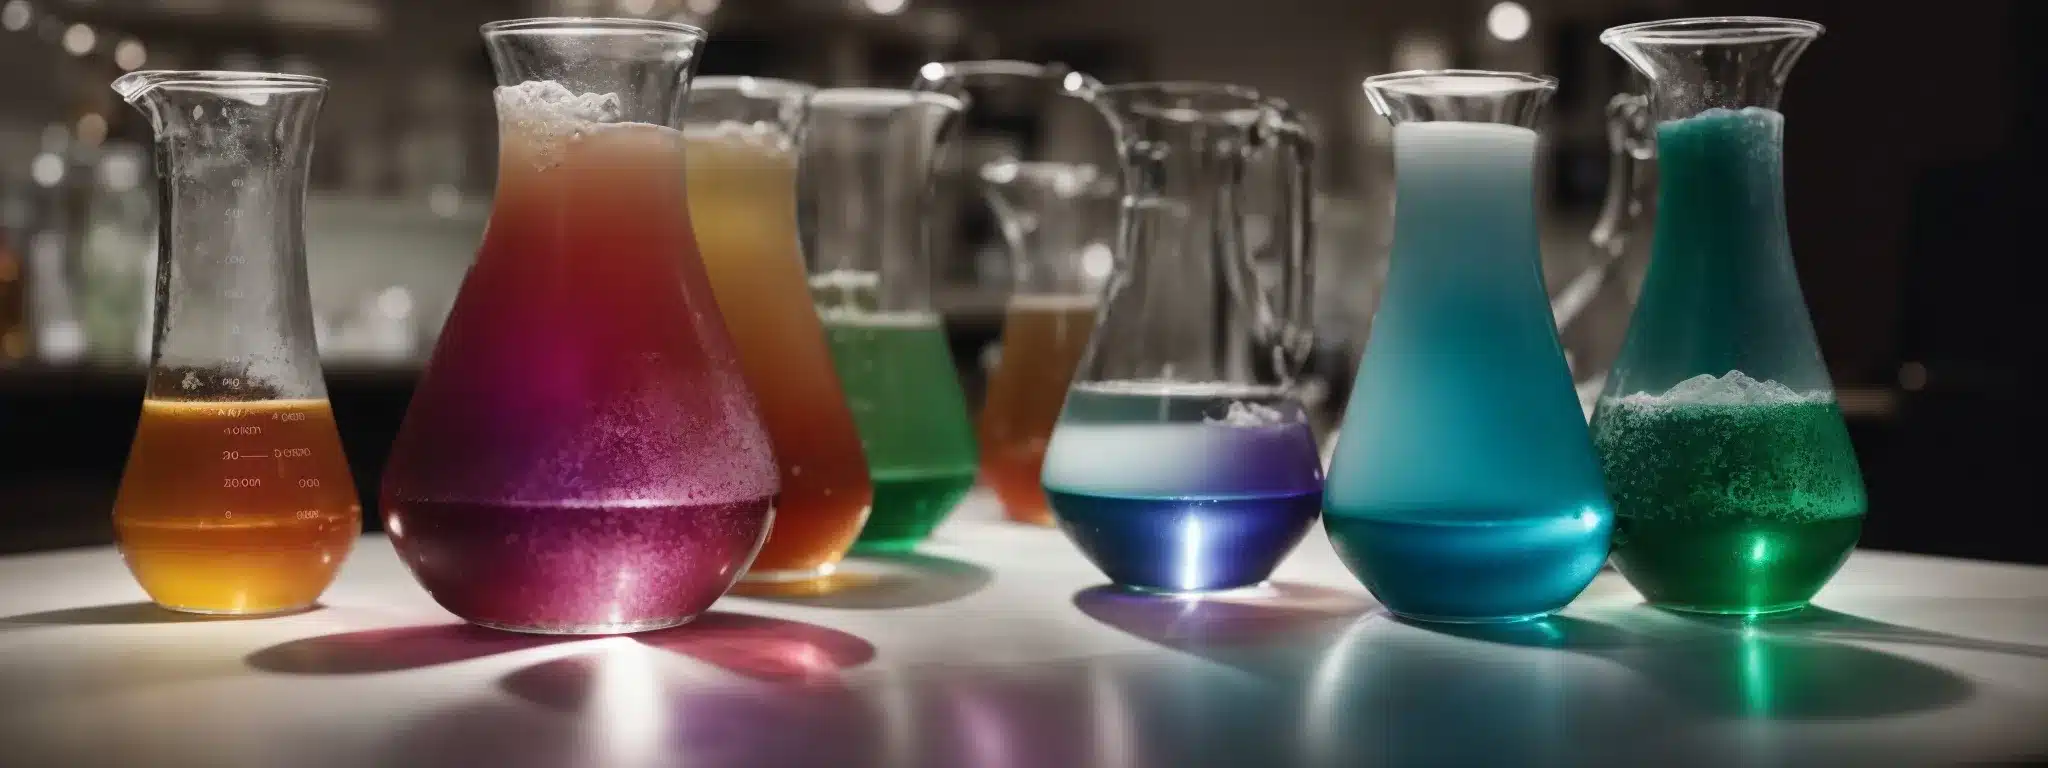 Several Beakers Filled With Colored Liquids Sit Atop A Lighted Table, Hinting At The Meticulous Process Of Analyzing And Deciphering Brand Value Through Quantitative Analysis.